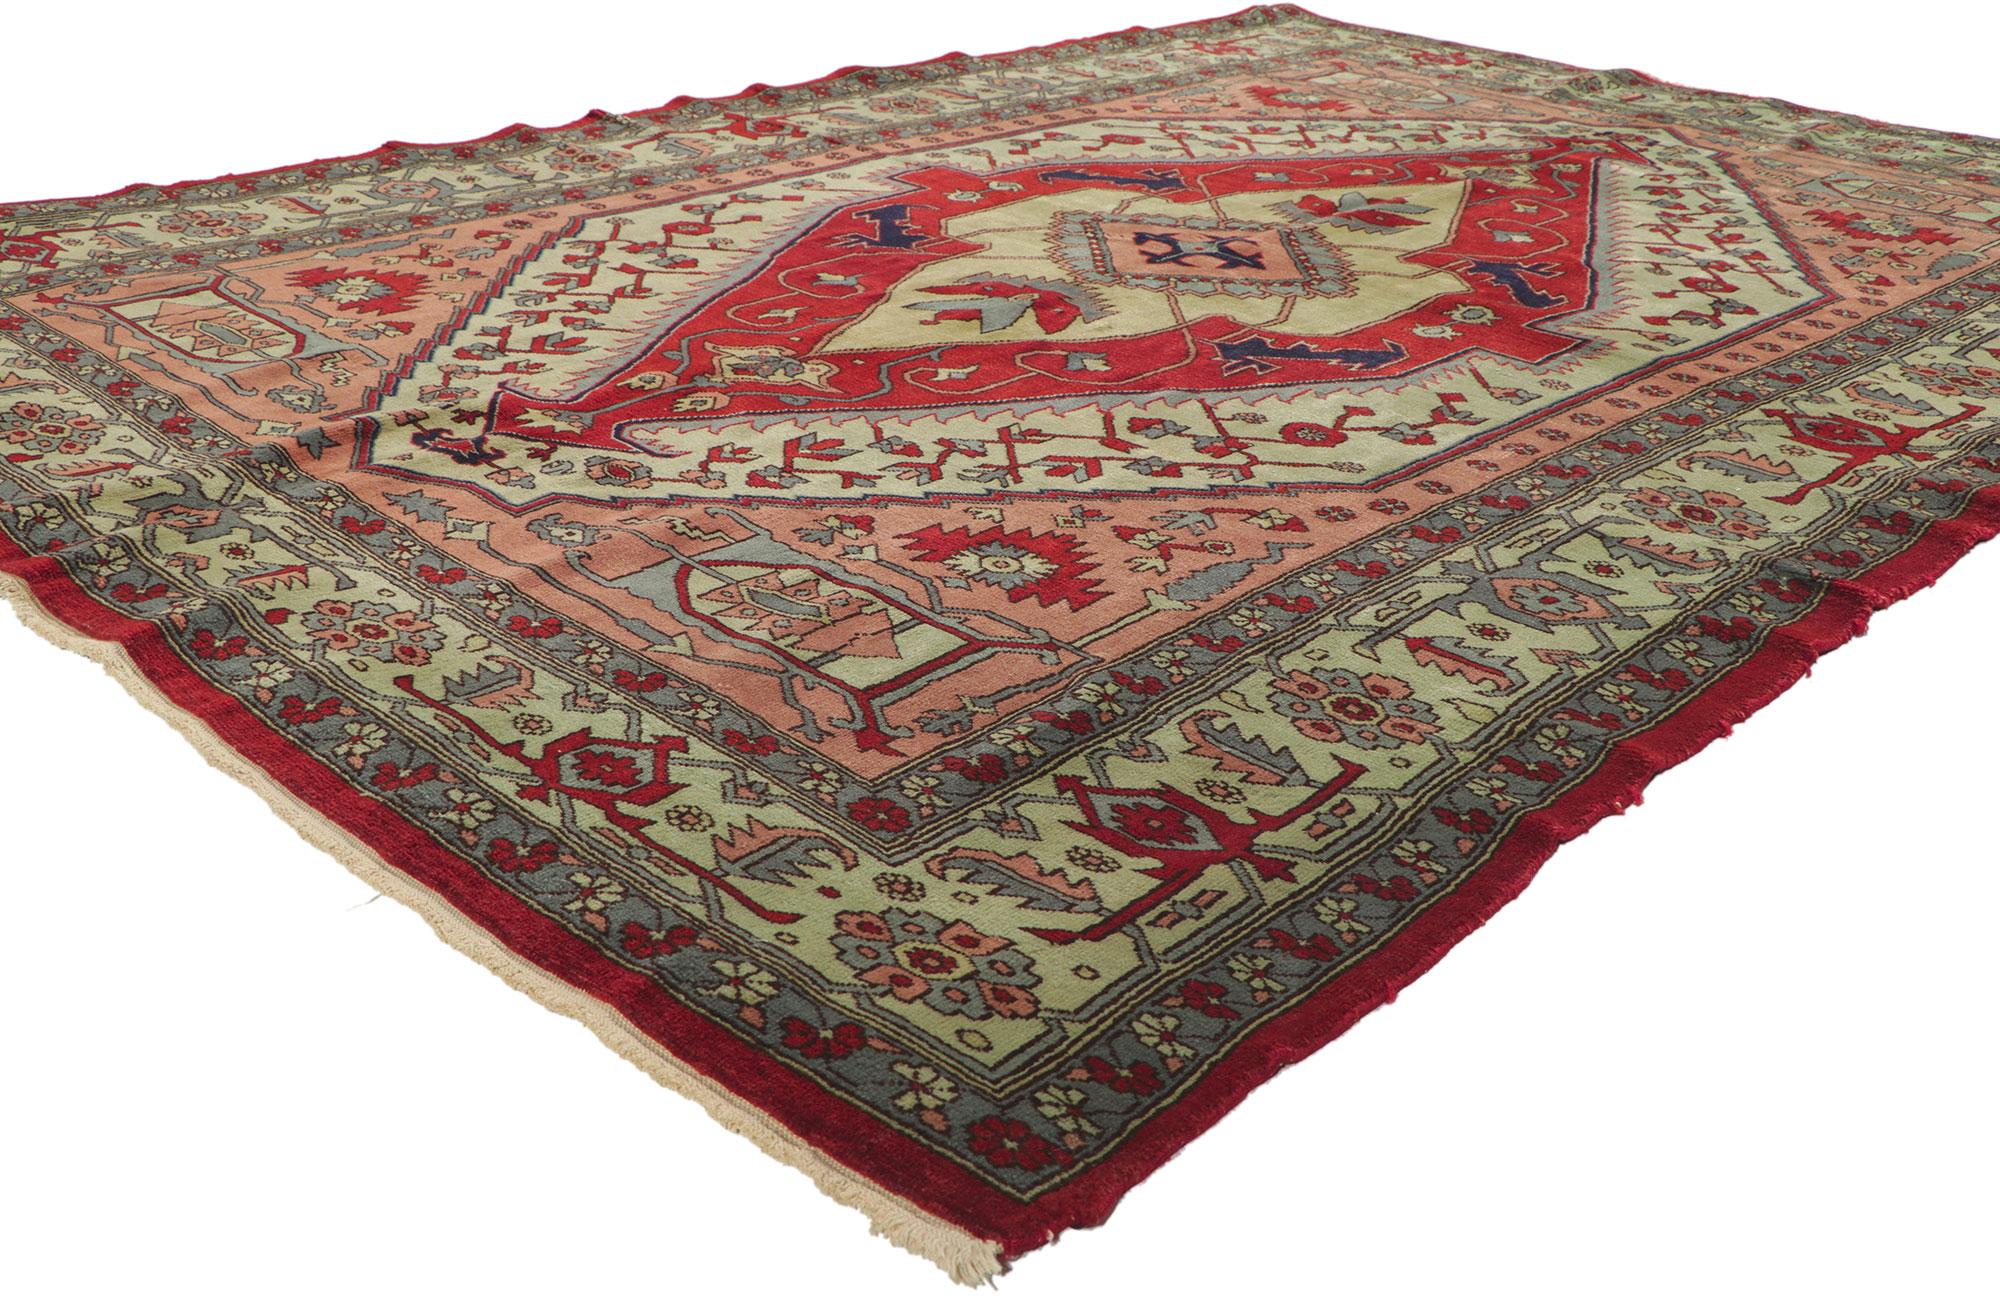 71940 Vintage Egyptian Serapi Rug, 05'09 x 07'07. Egyptian Persian Serapi rugs are a distinctive fusion of traditional Persian Serapi rug elements with the craftsmanship and materials of Egyptian rug-making traditions, renowned for their intricate